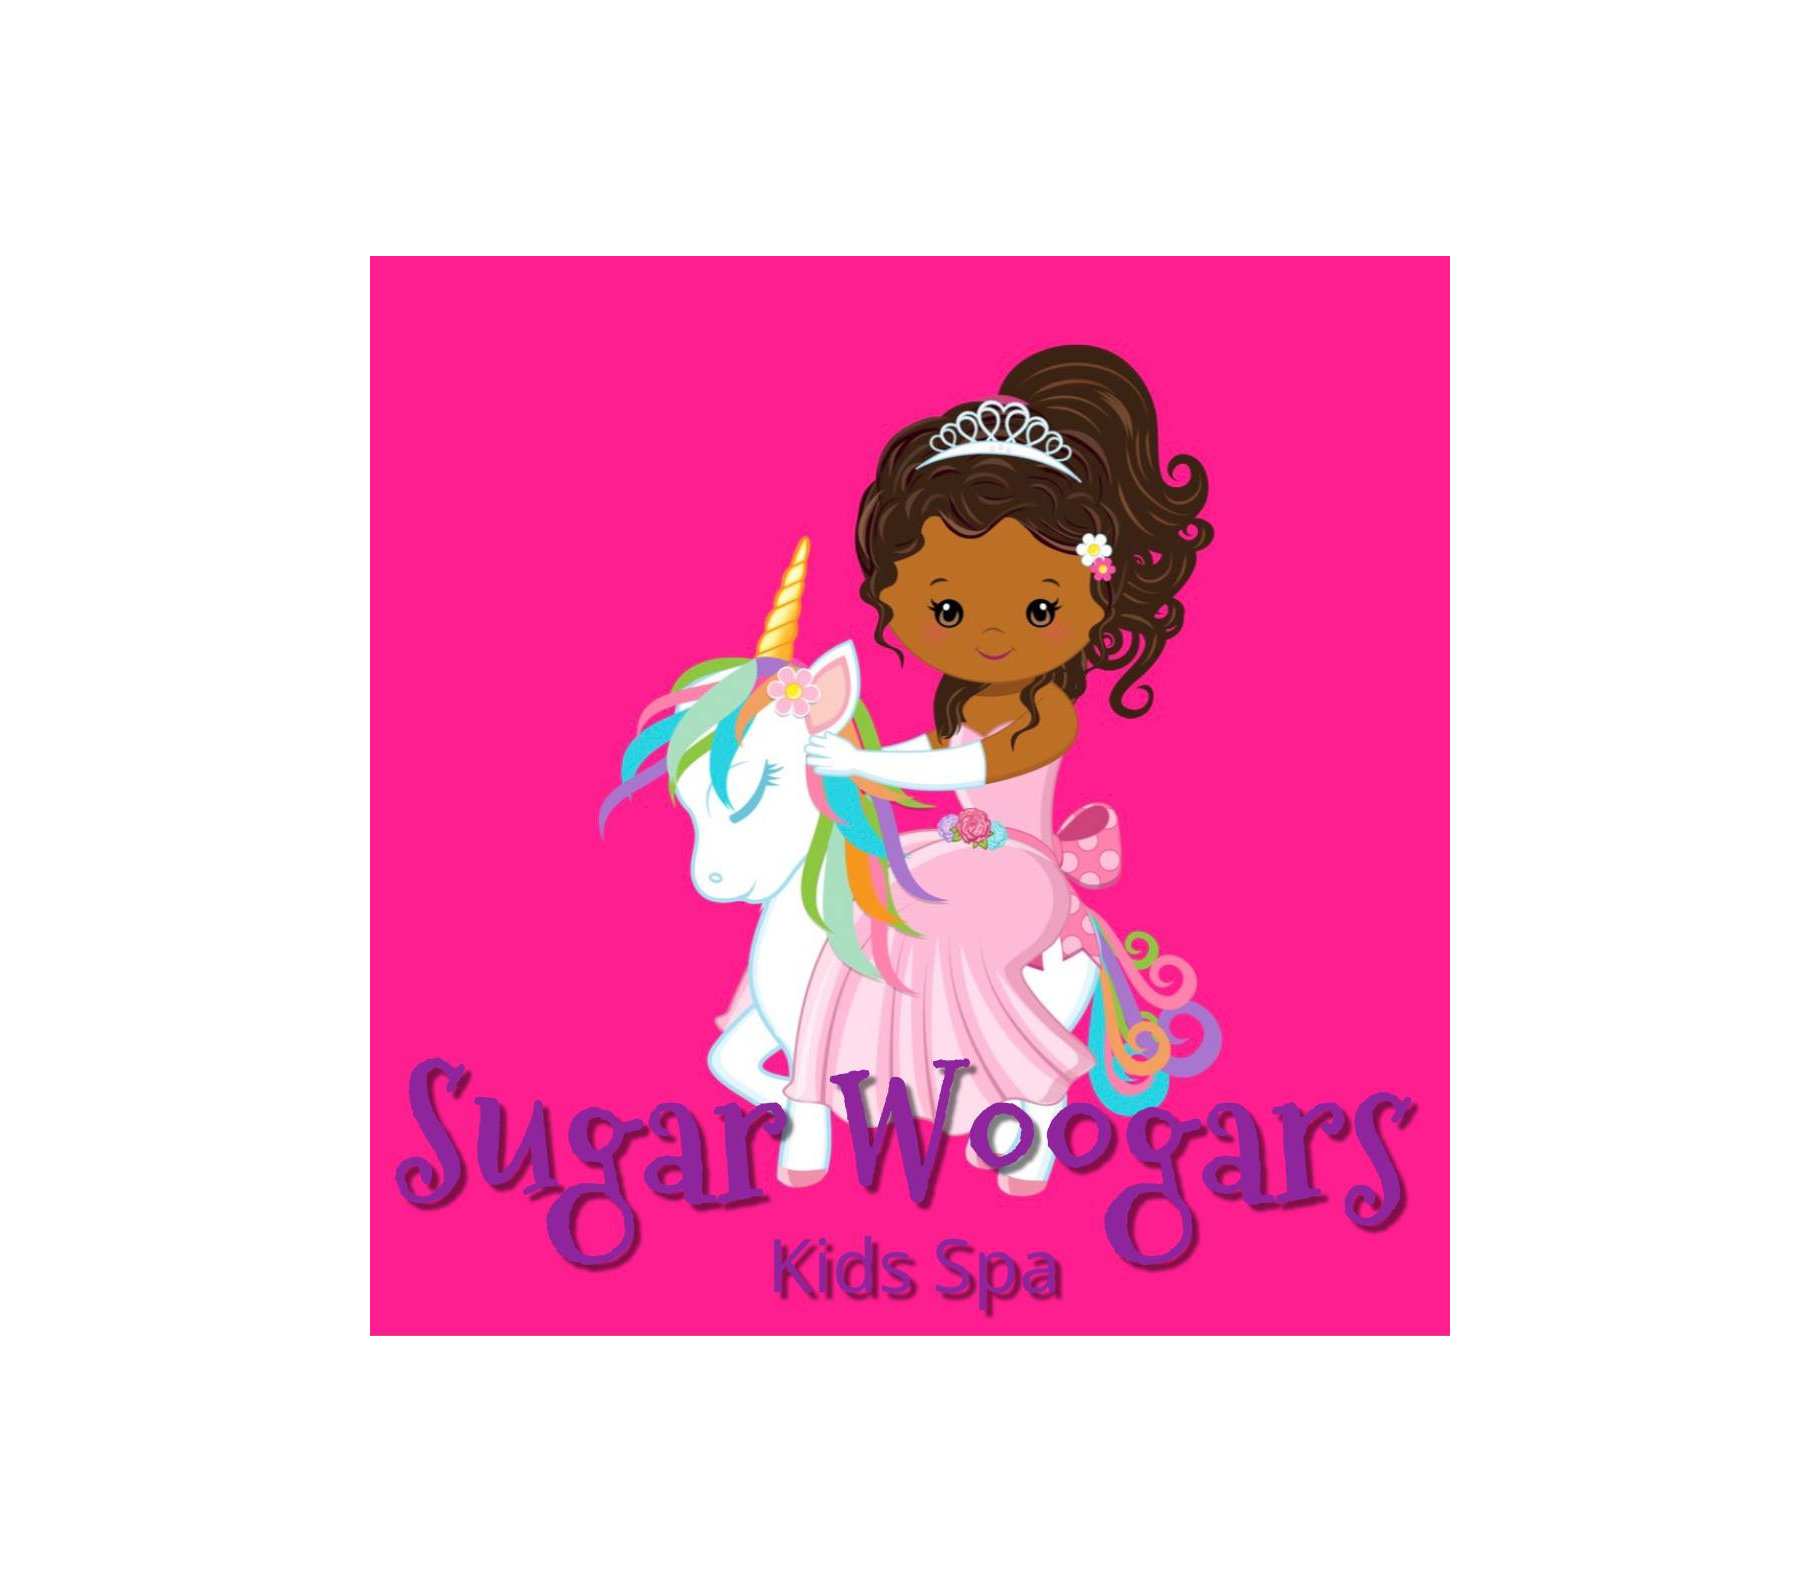 Princess Themed Spa and Event Space - Sugar Woogars Kids Spa